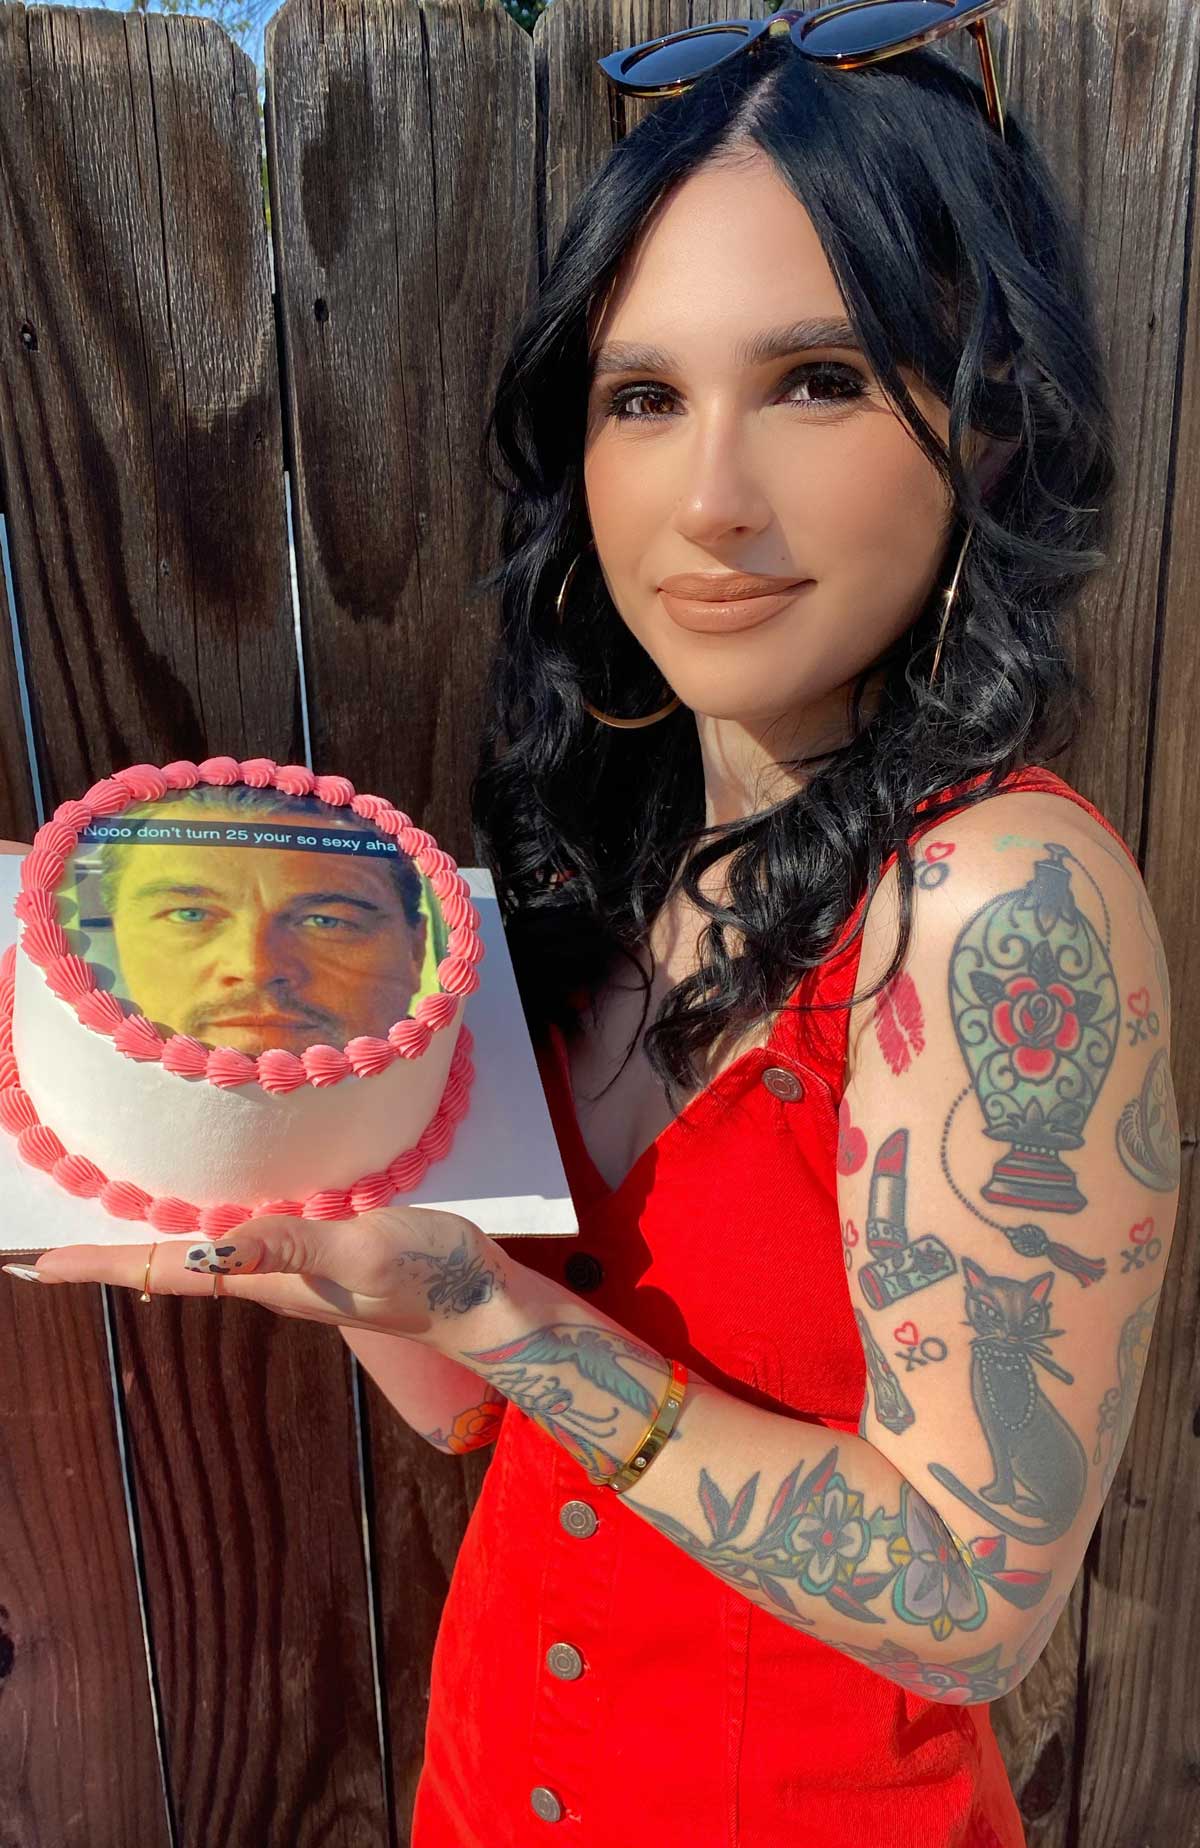 I turned 25 today and my boyfriend got me this cake..